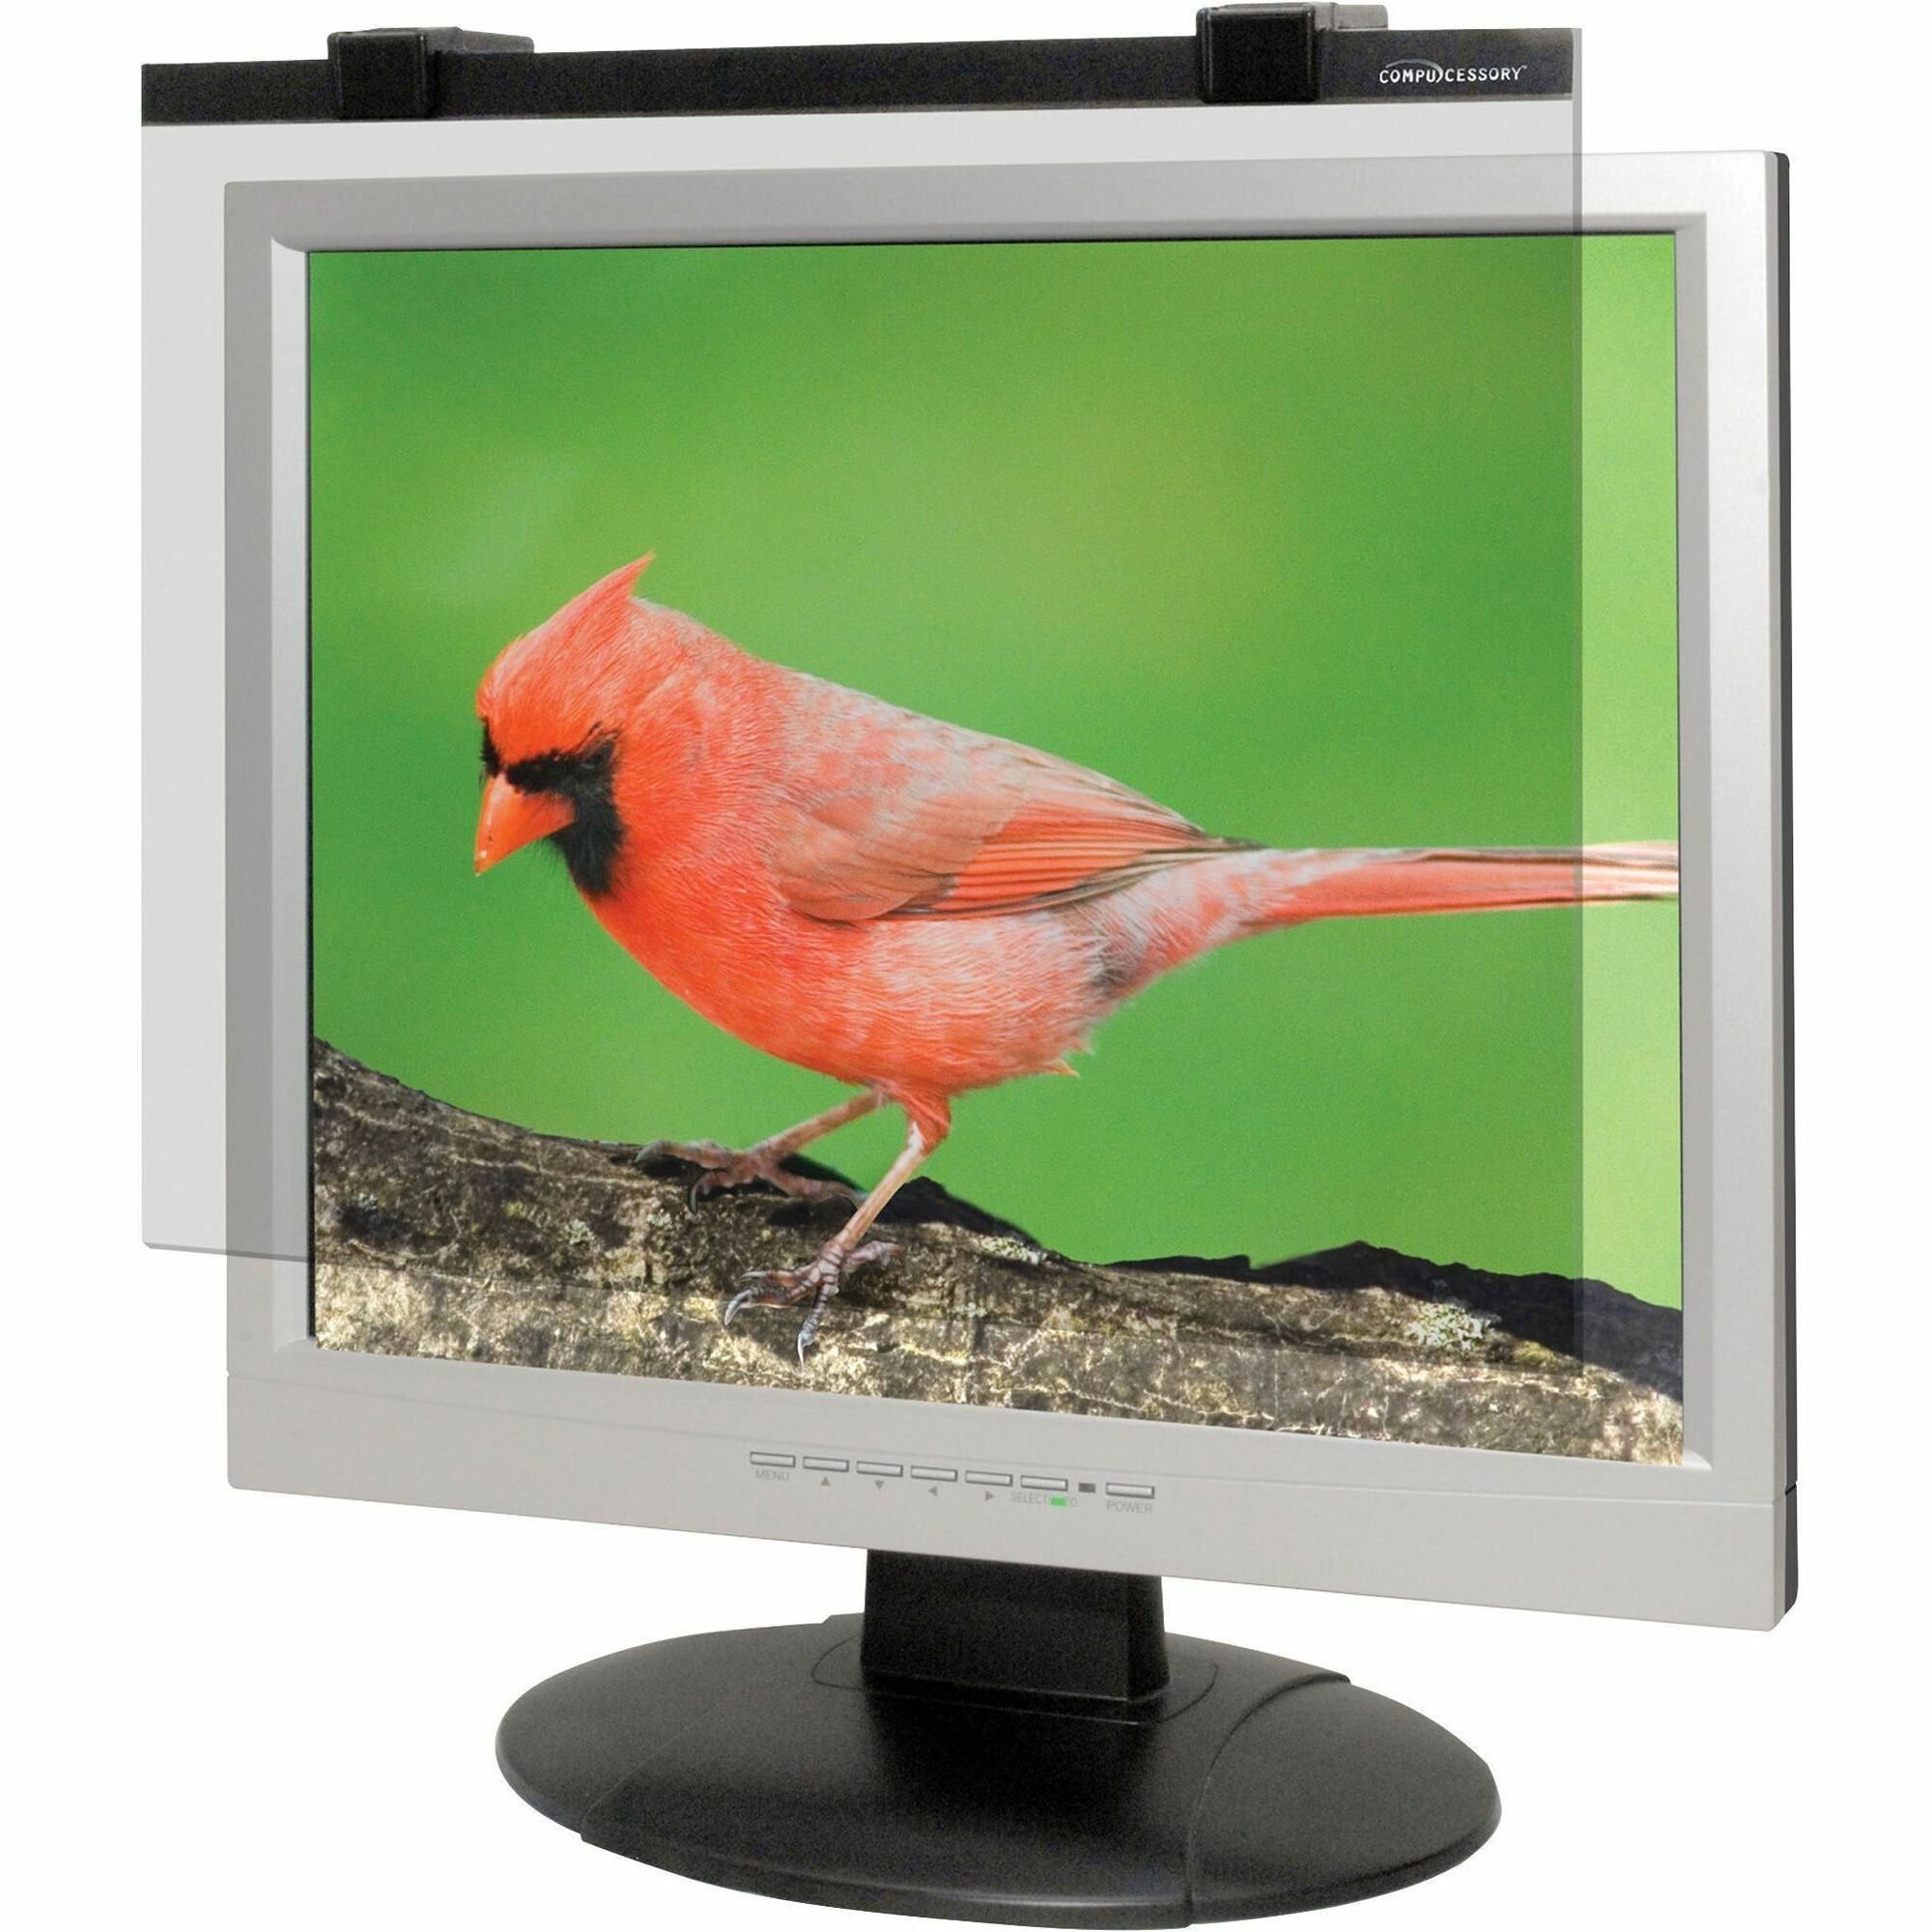 Business Source 19"-20" Monitor Antiglare Filter Black - For 19" Widescreen LCD, 20" Monitor - 16:10 - Acrylic - Anti-glare - 1 Pack - 1